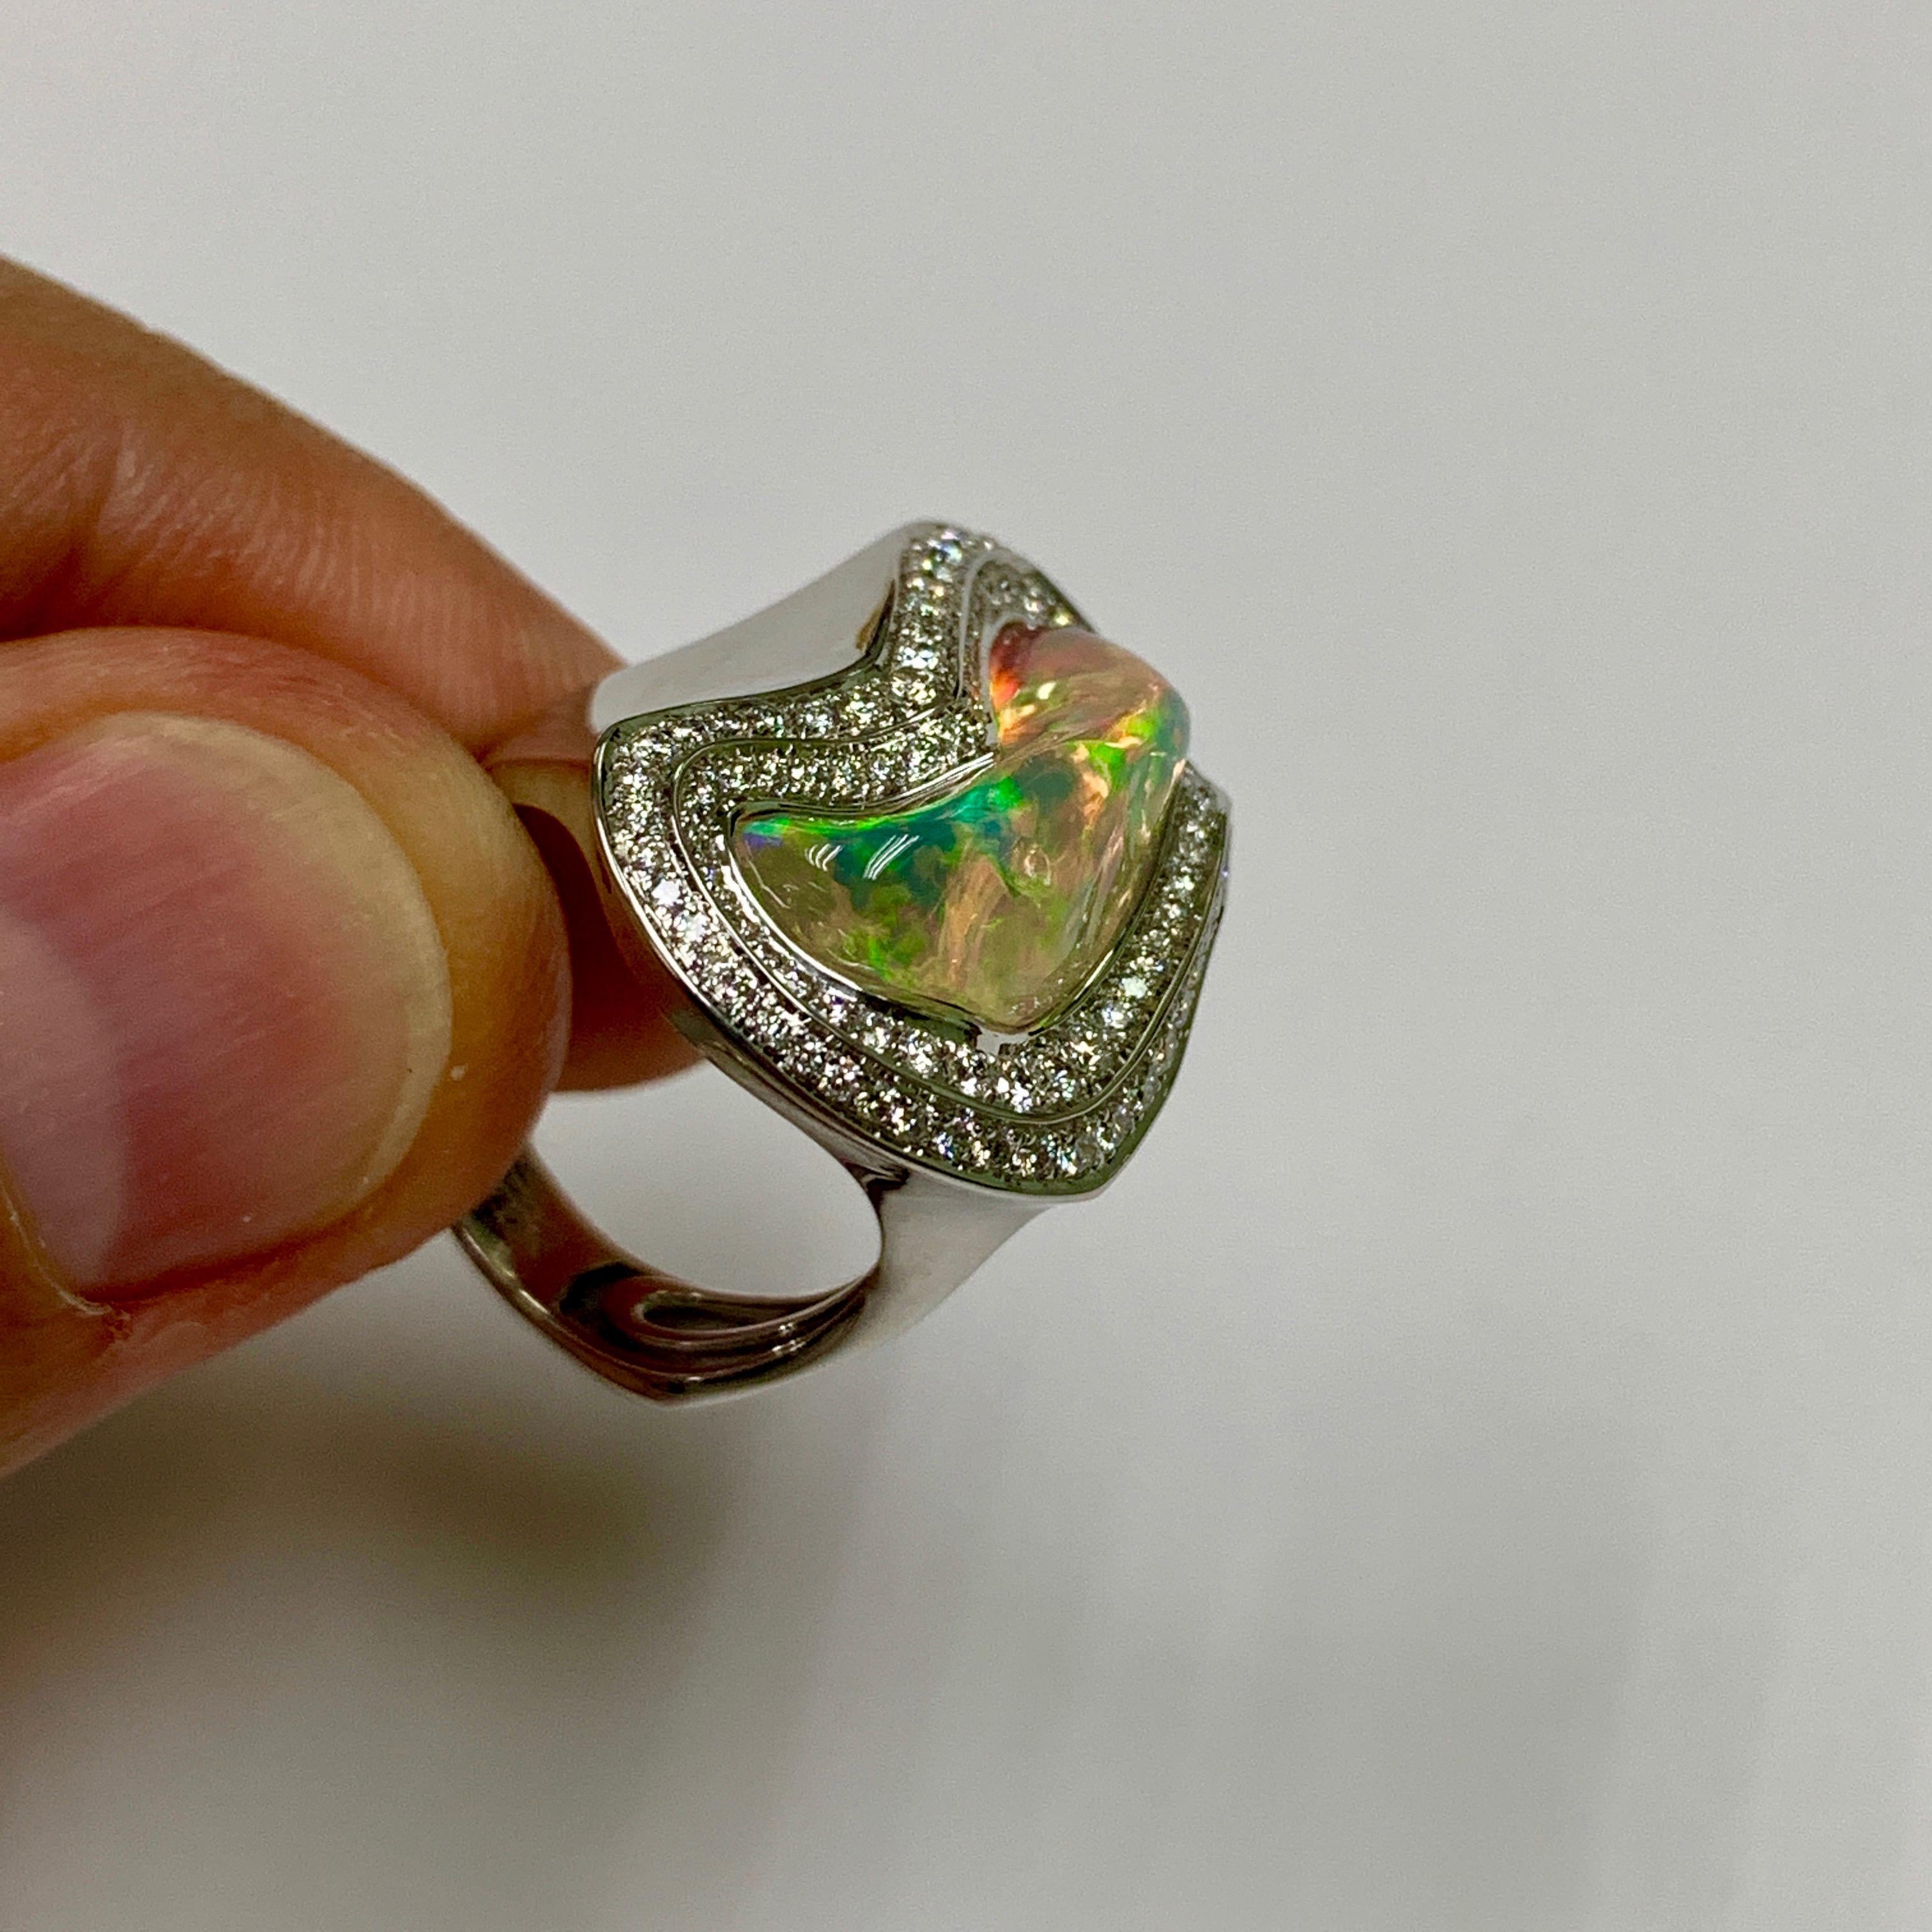 Sugarloaf Cabochon Mexican Opal 5.17 Carat Diamonds One of a Kind 18 Karat White Gold Ring For Sale